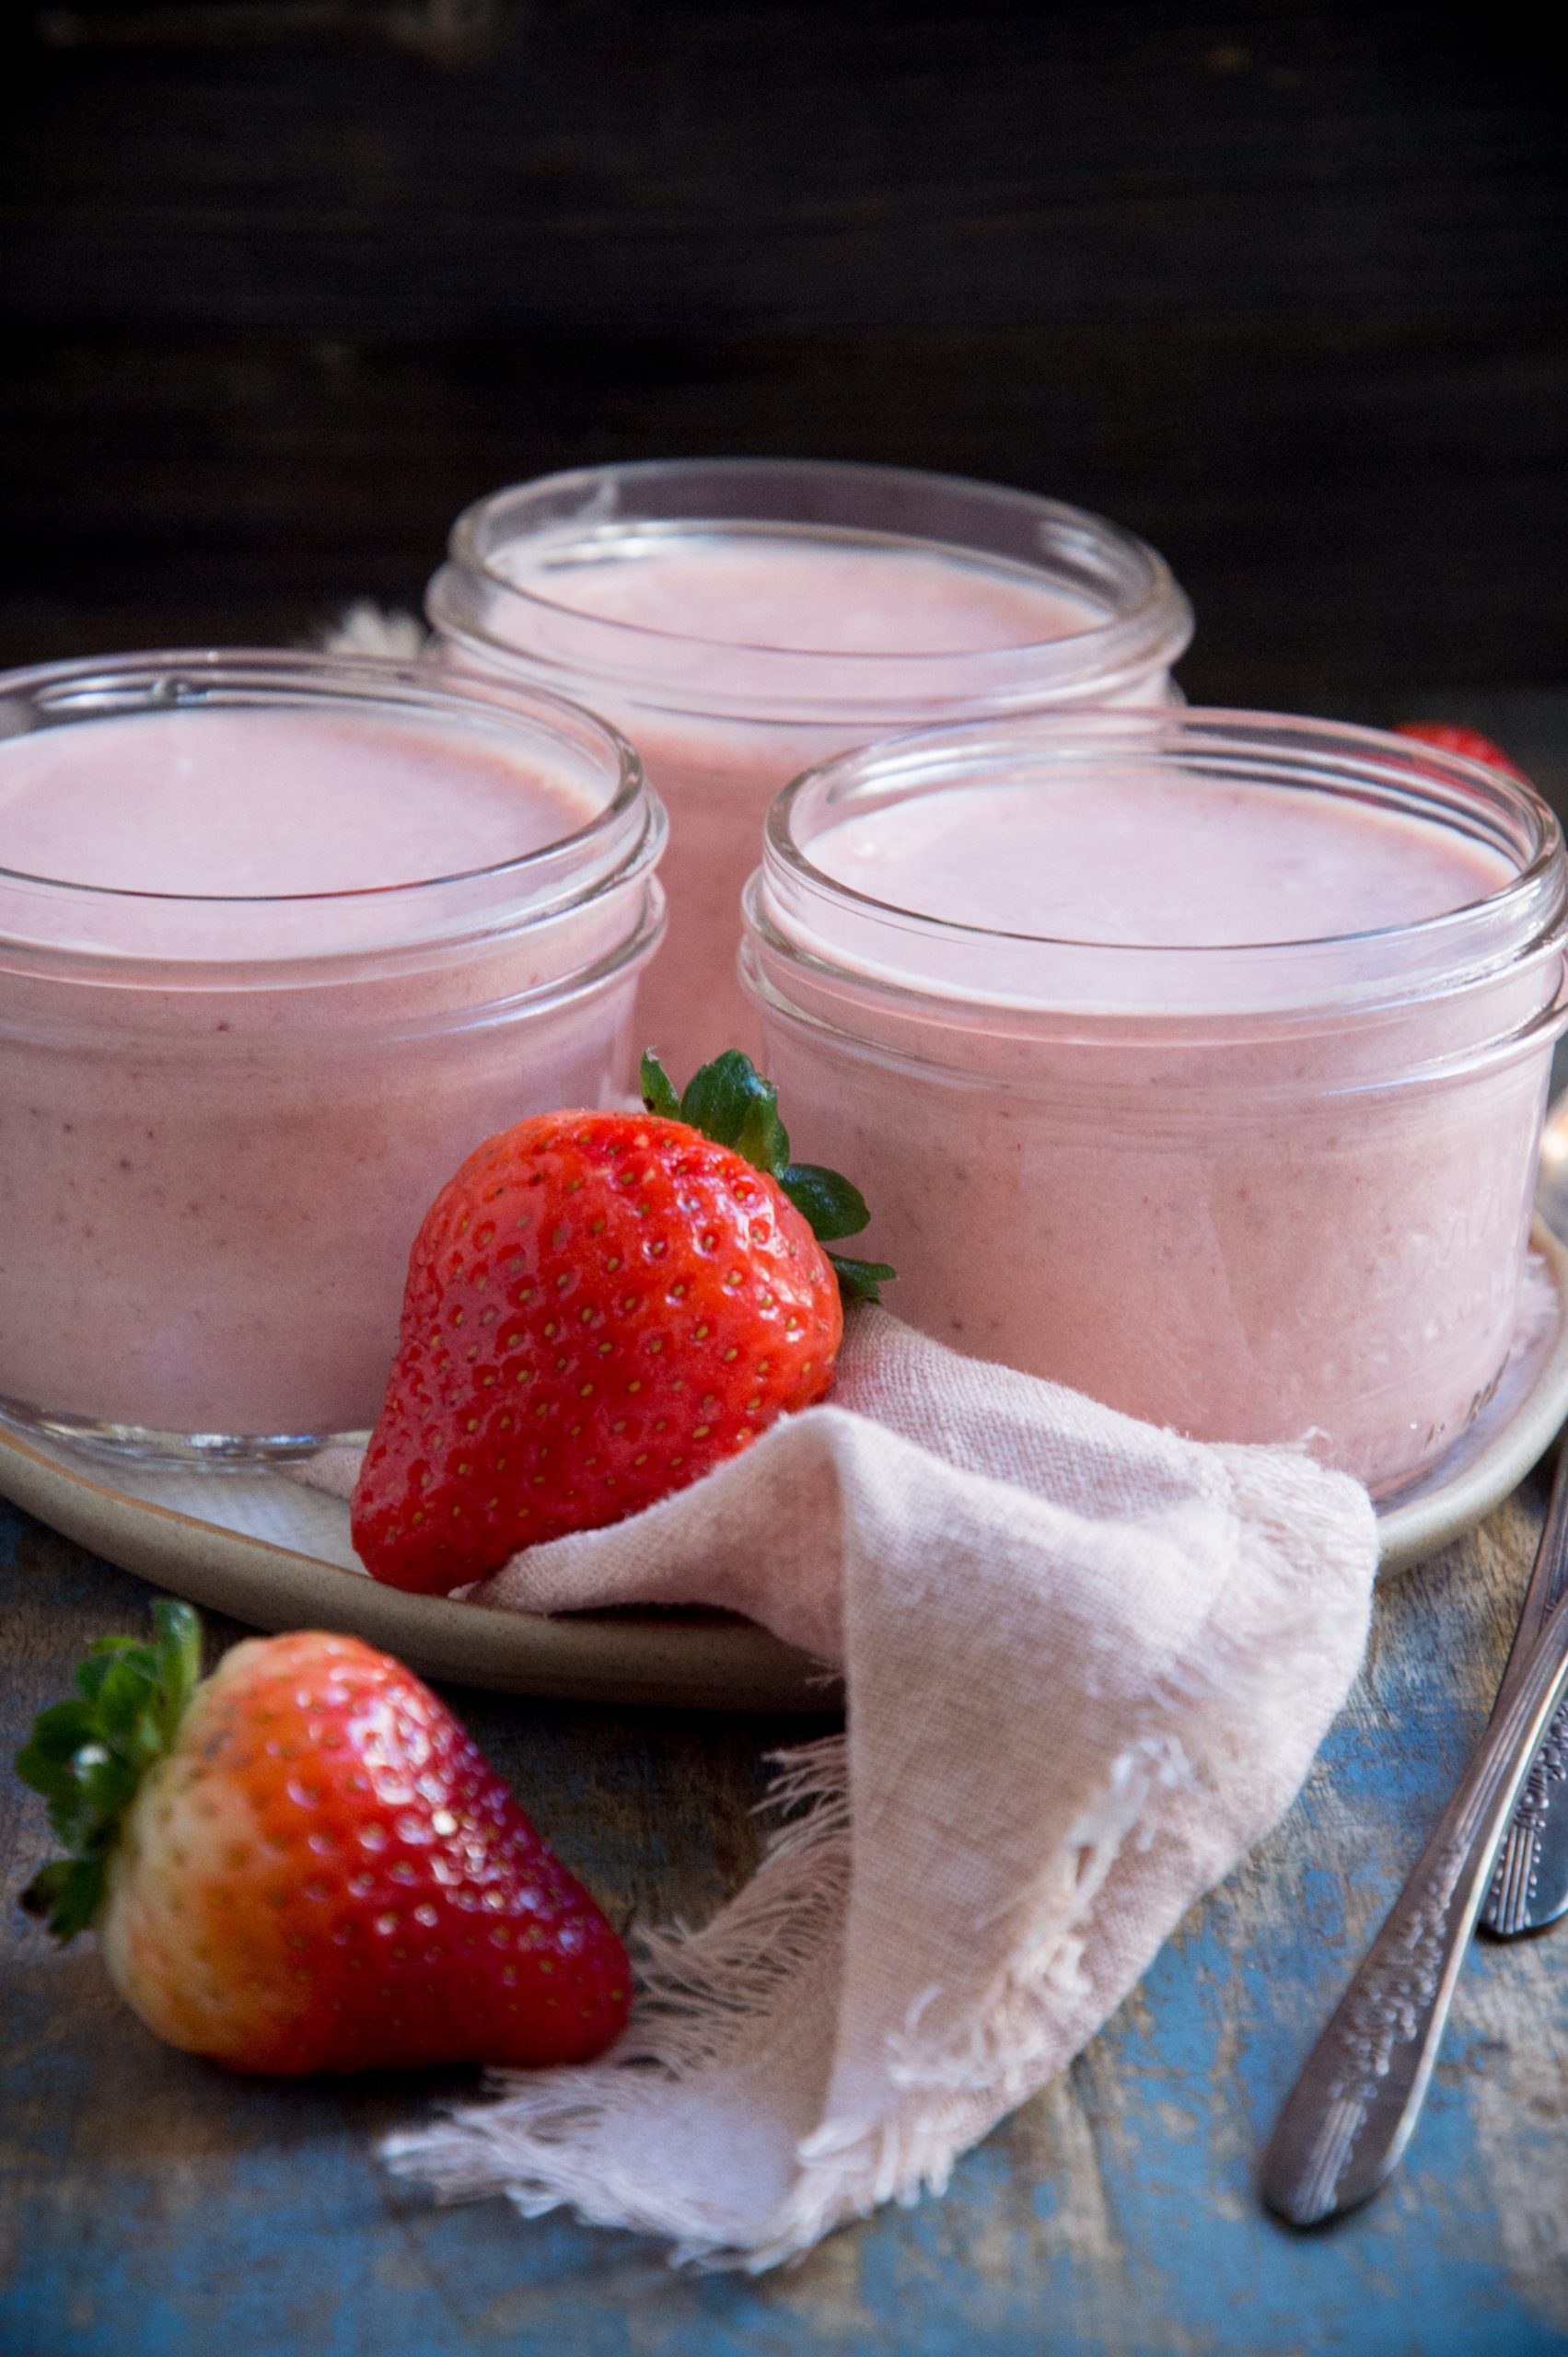 Keto Strawberry Mousse with strawberries.